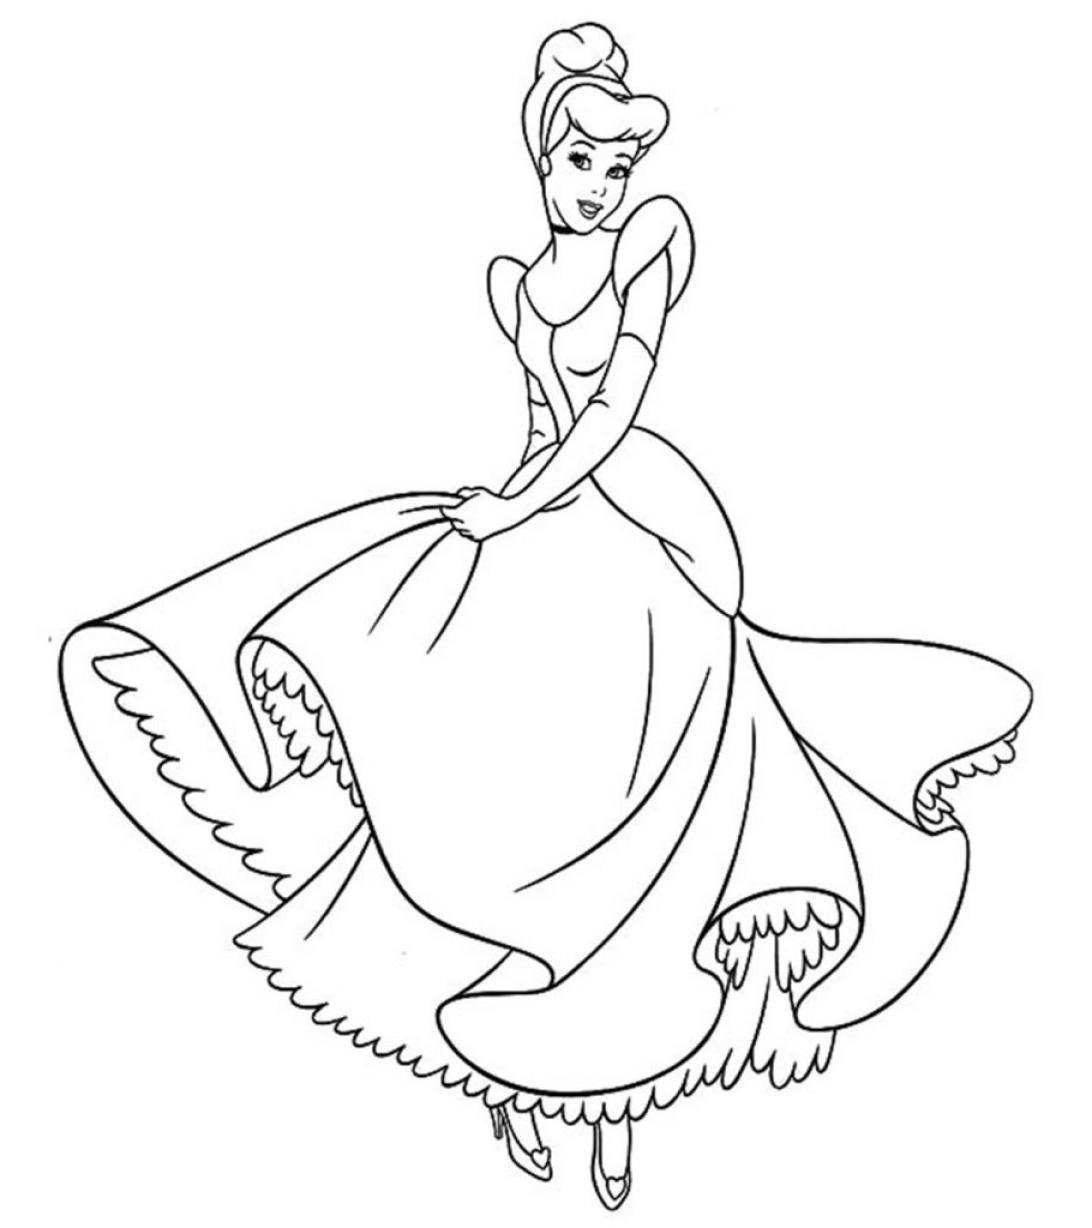 Free Printable Cinderella Coloring Pages for Kids - SheetalColor.com